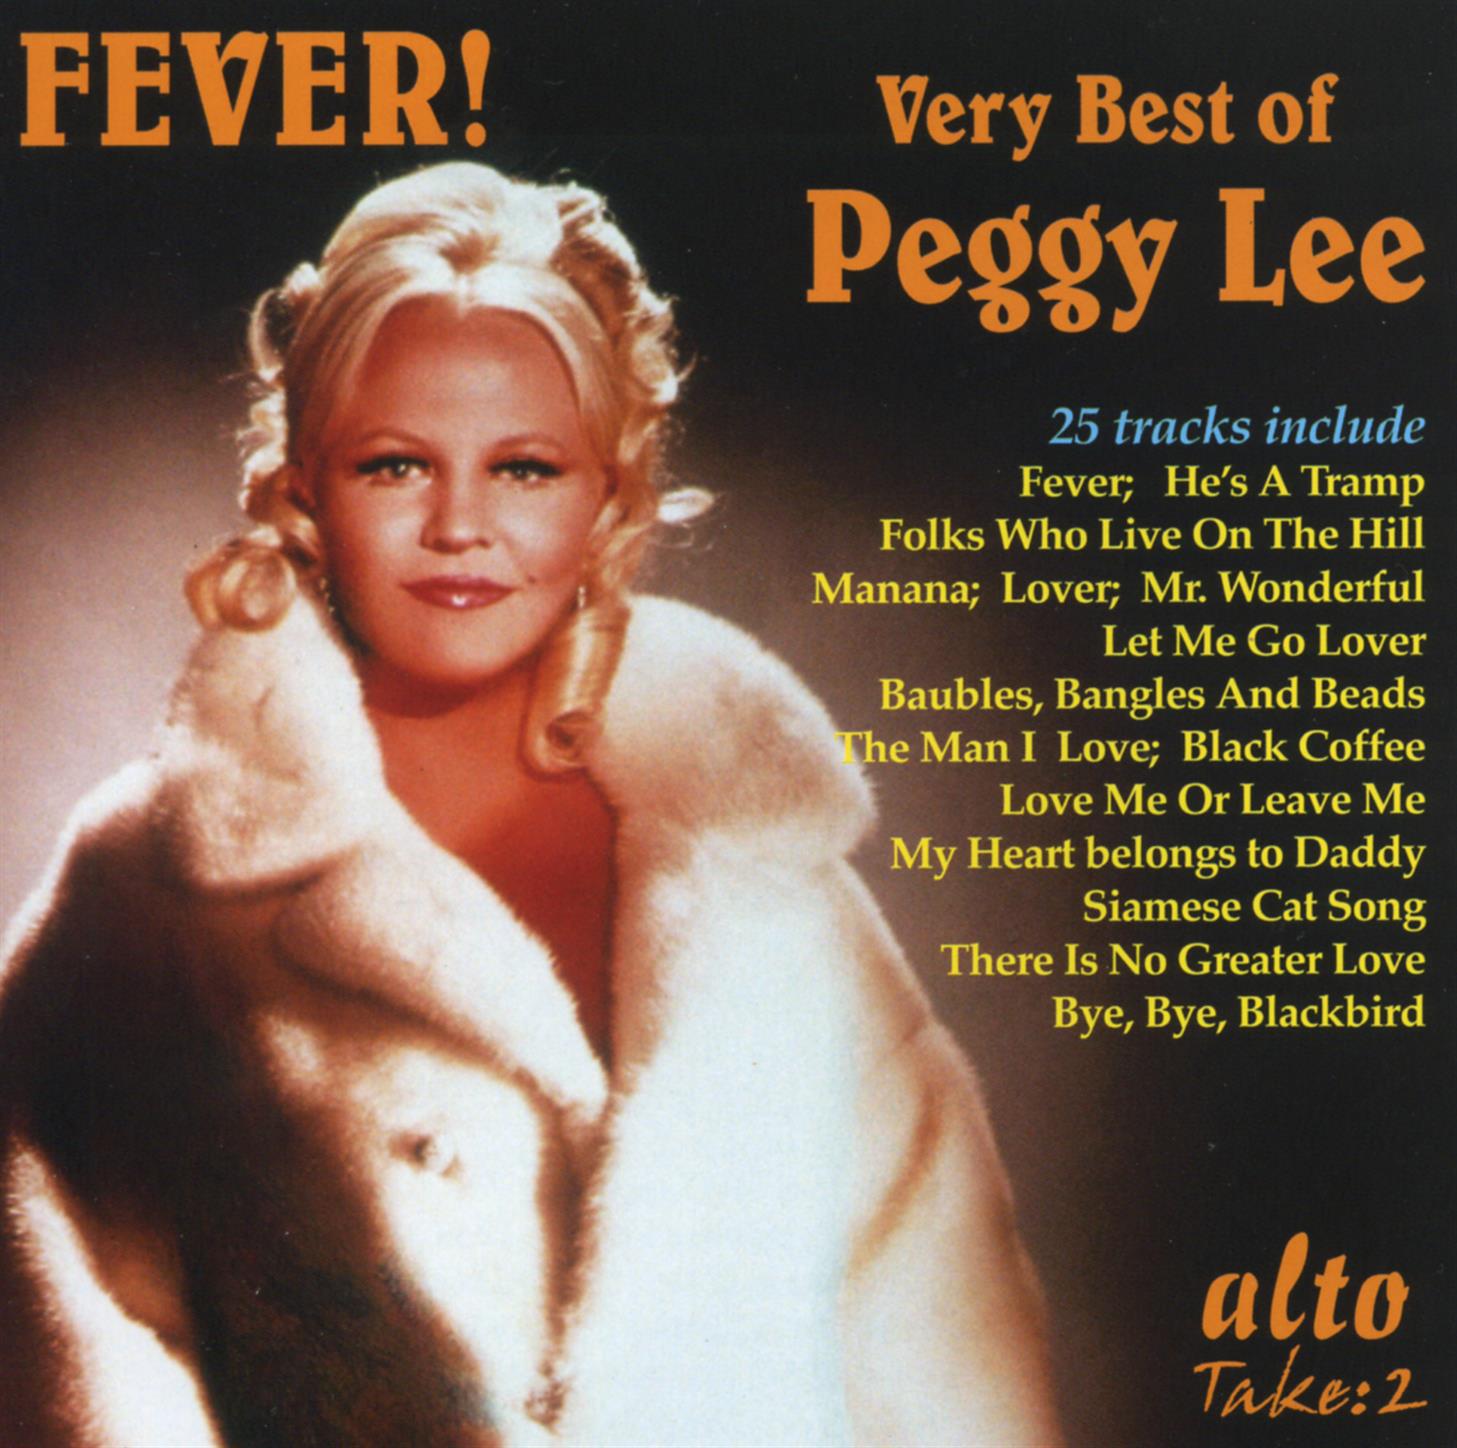 Fever: The Very Best Of Peggy Lee专辑